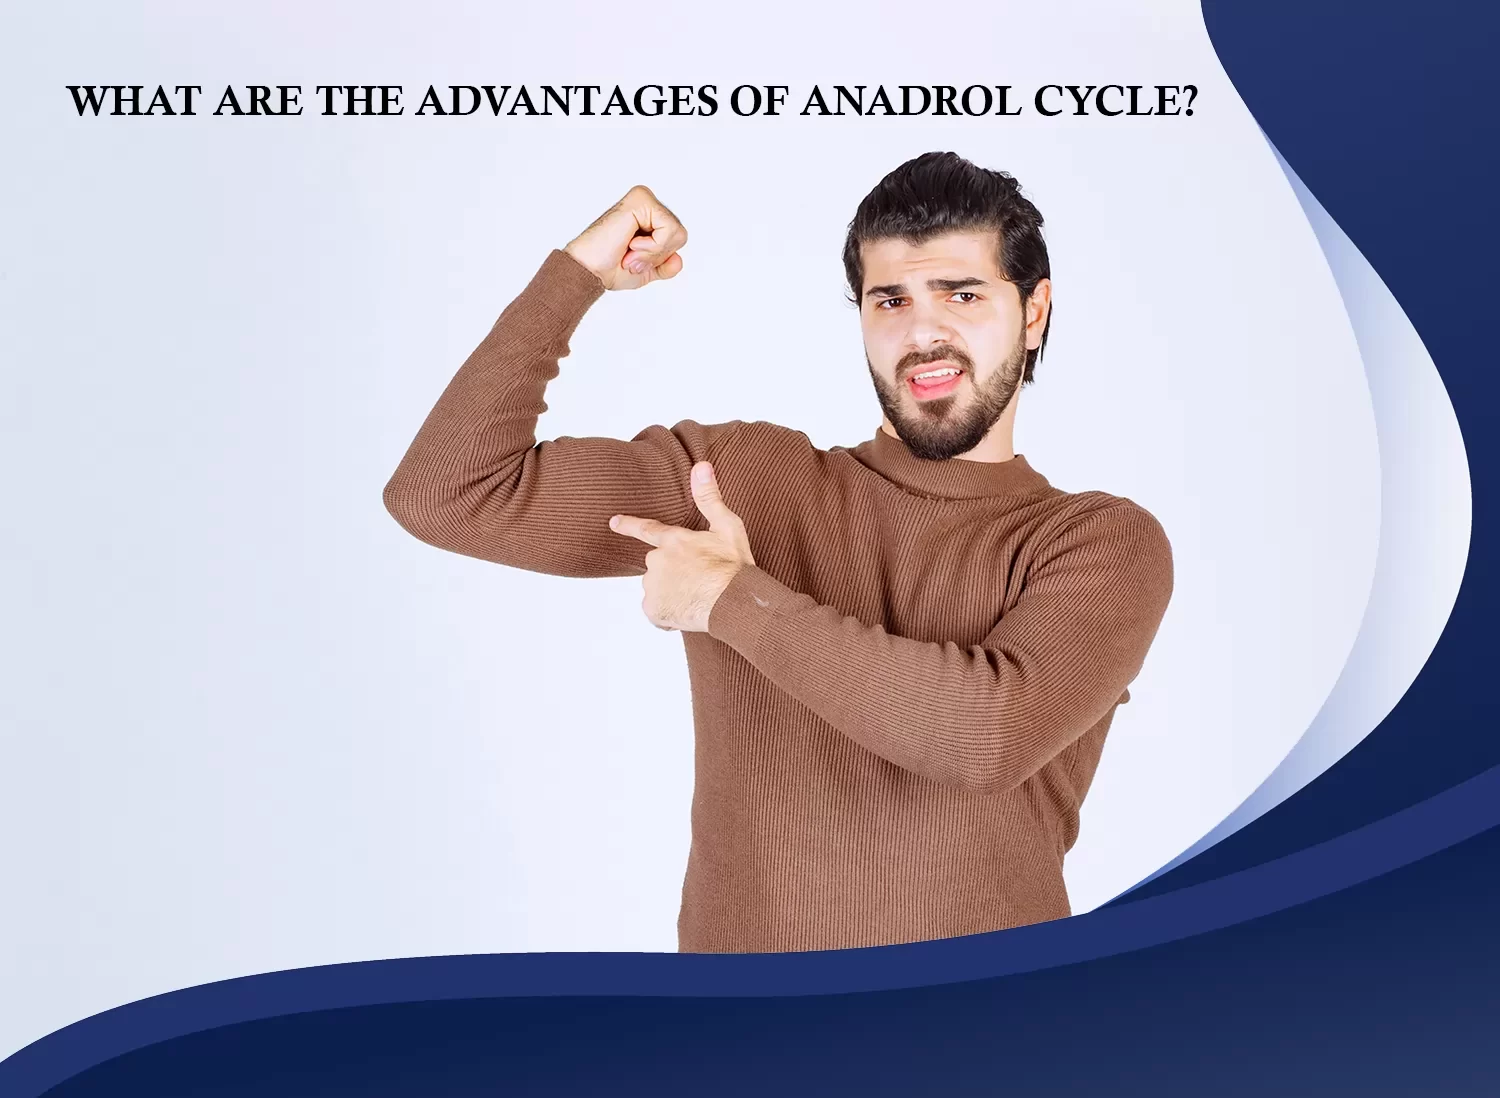 Advantages of Anadrol cycle